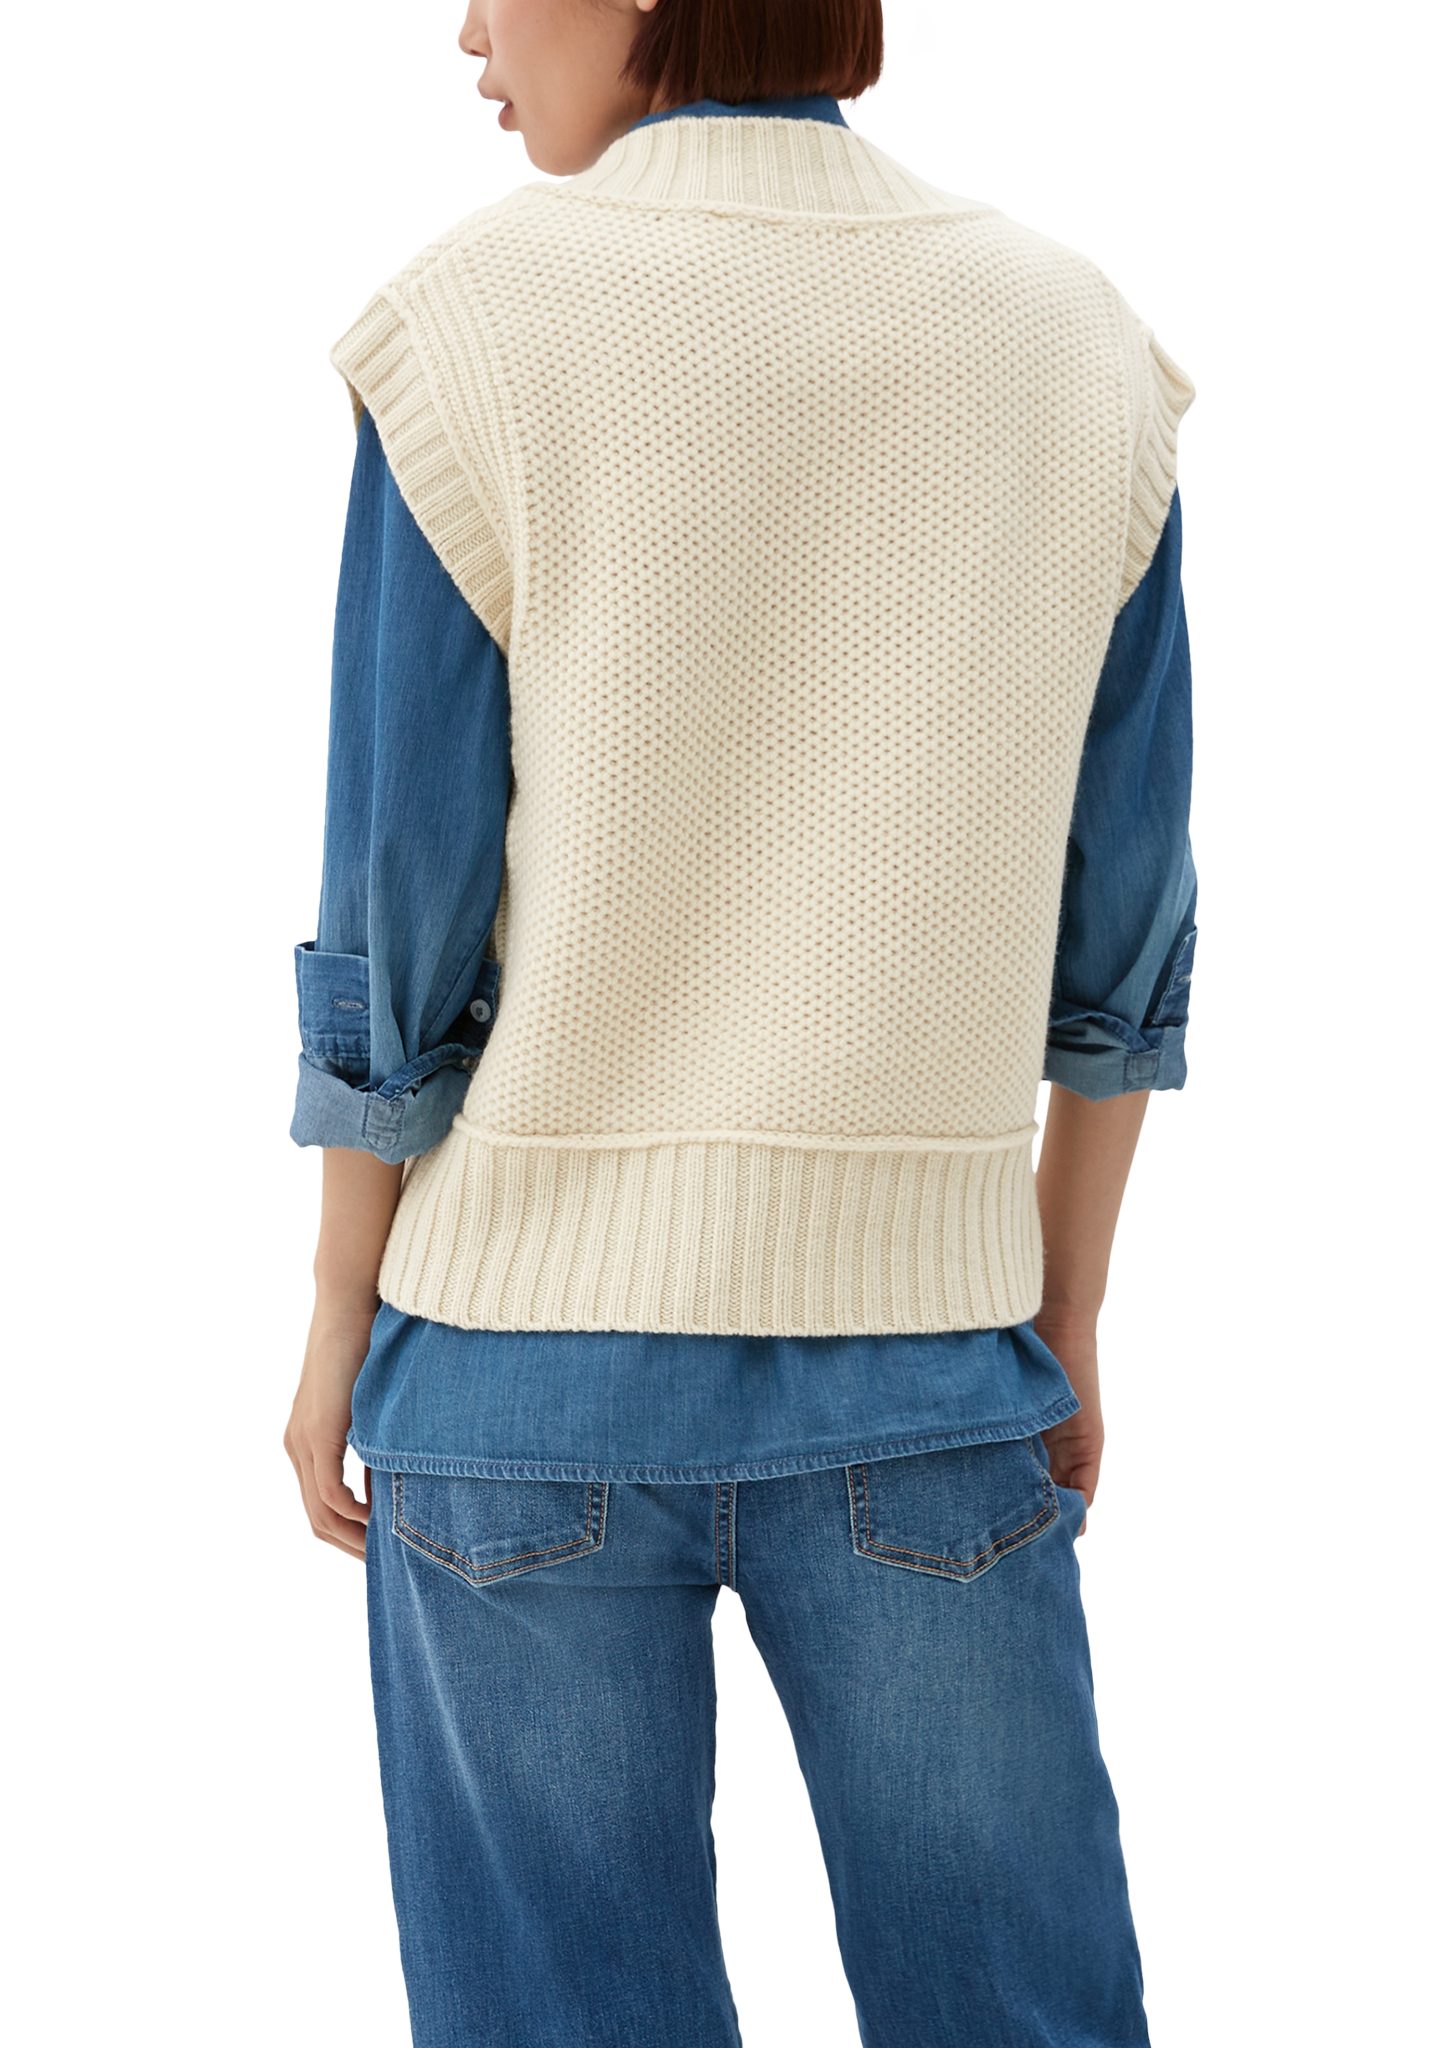 s.Oliver Strickpullover Kurzarm-Pullover Wolle aus